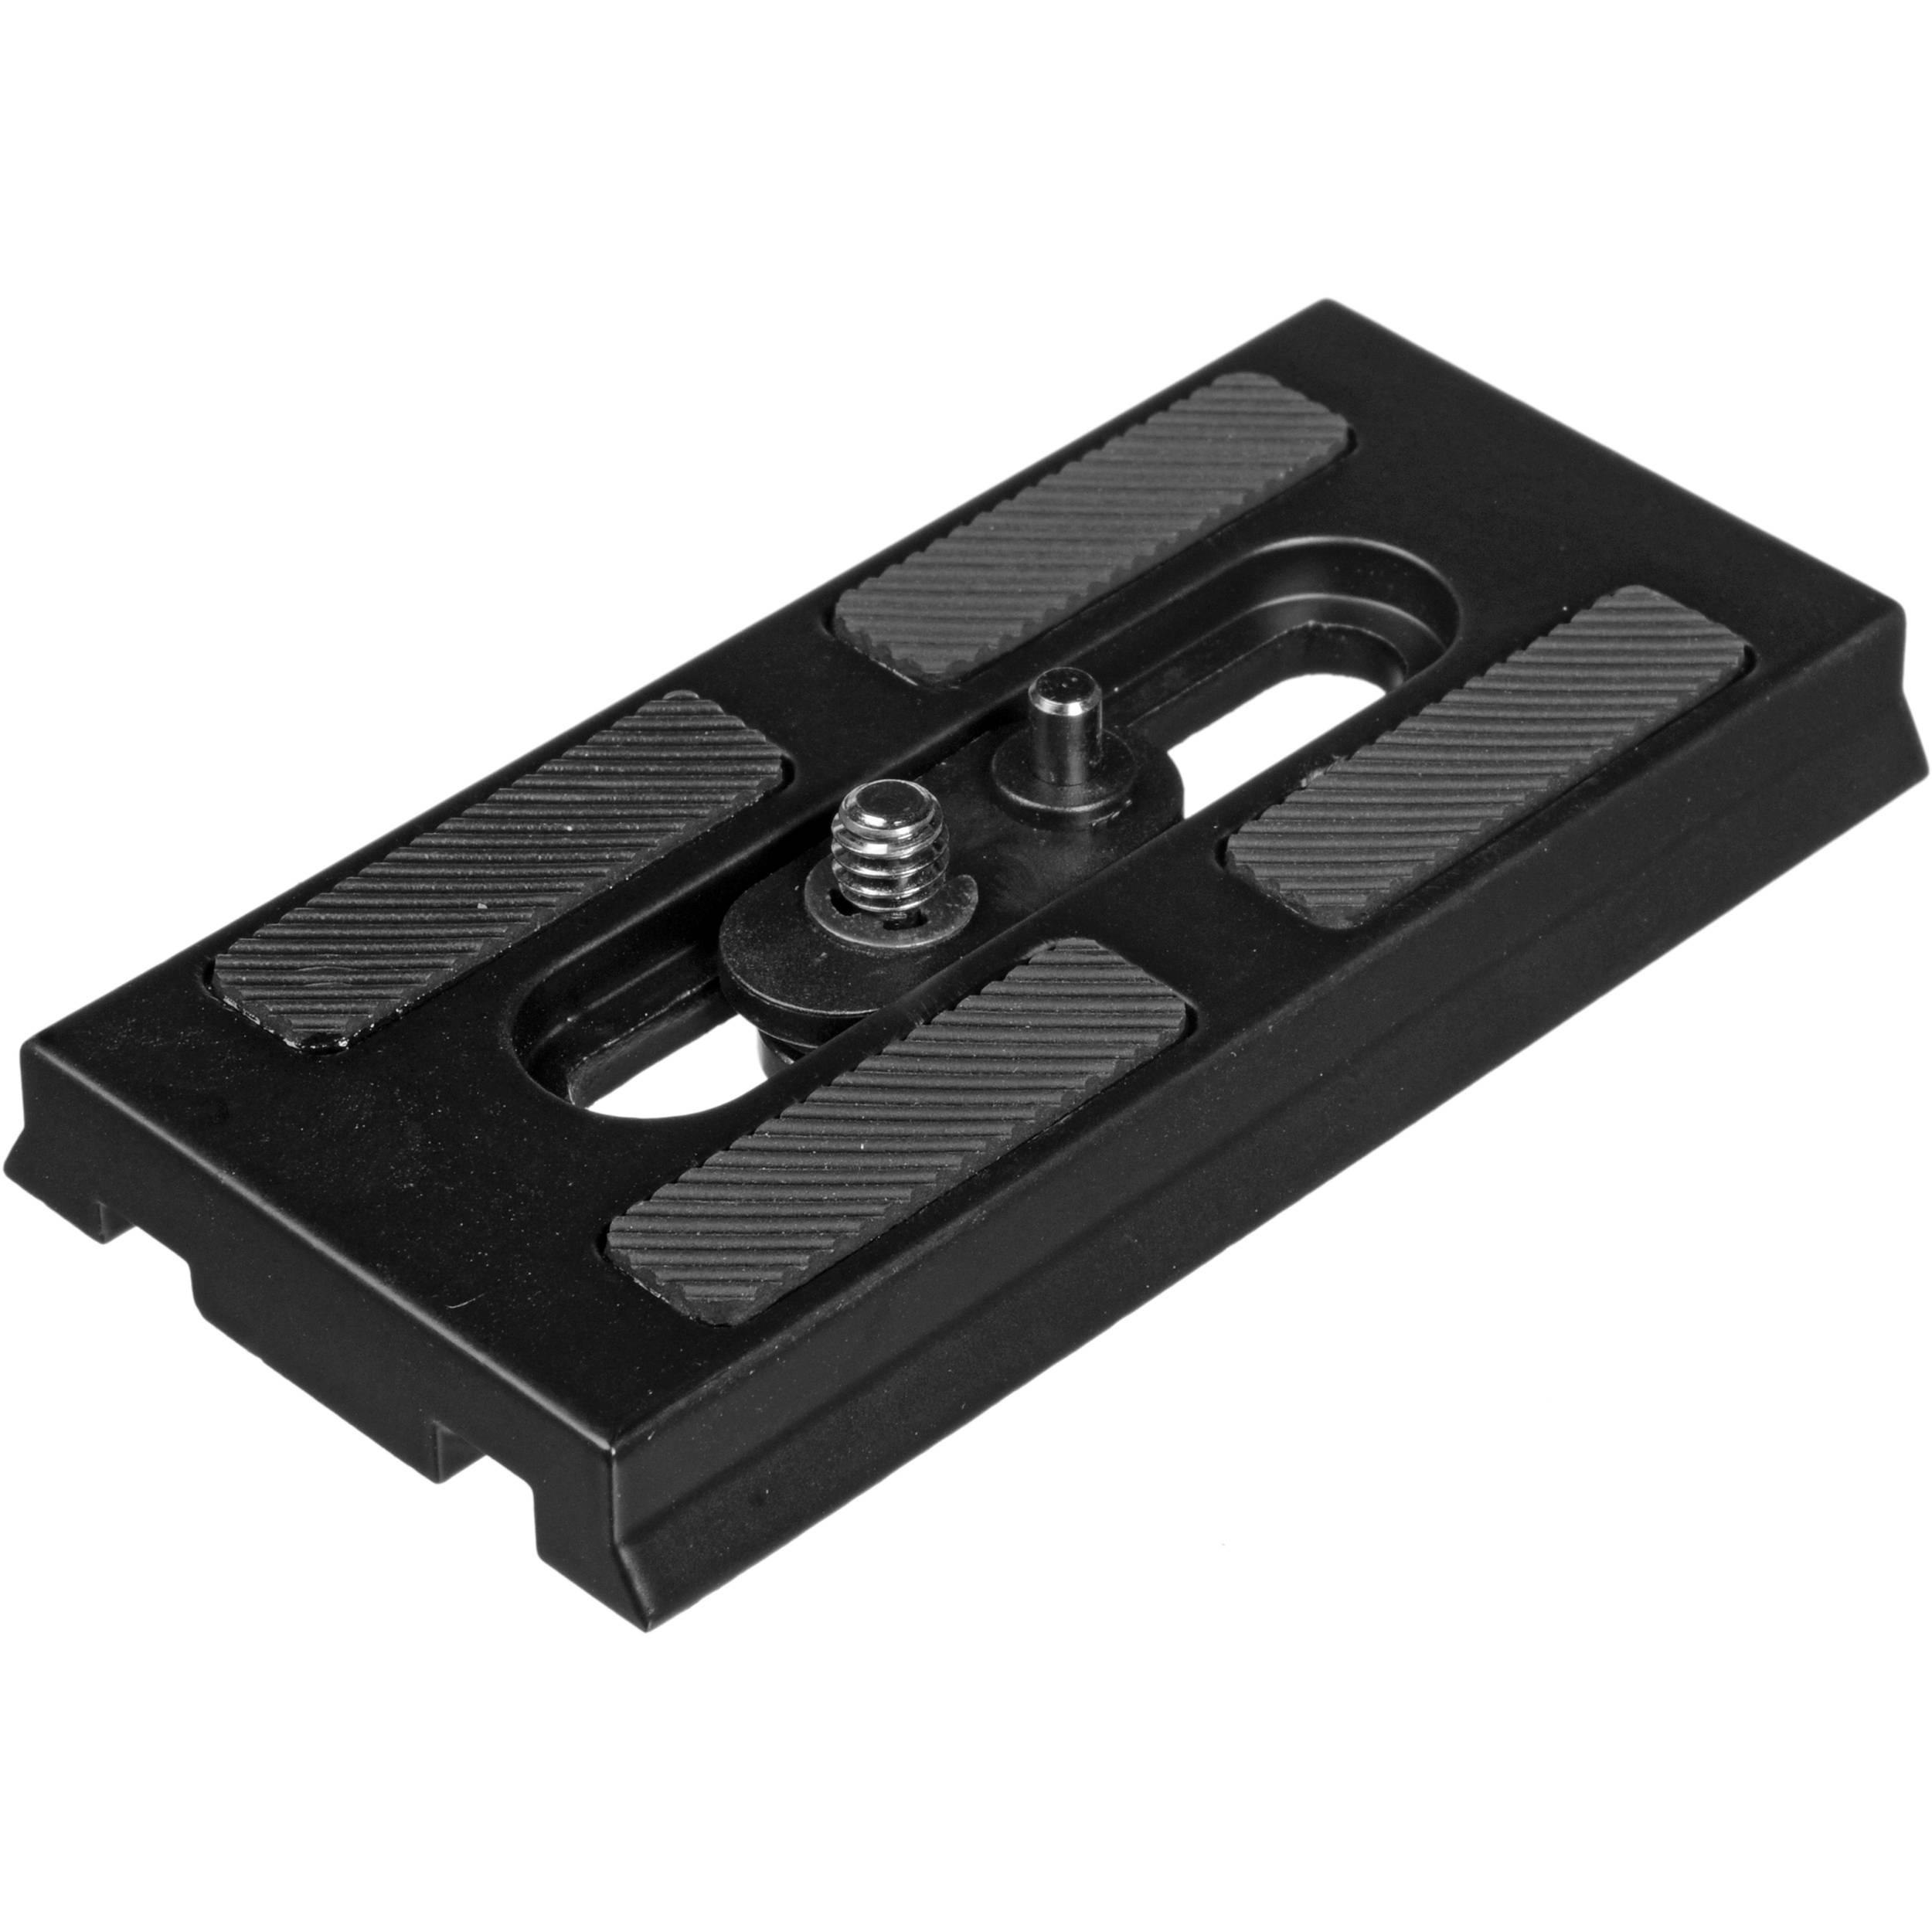 Benro QR11 Slide-In Video Quick-Release Plate for AD71FK5 Video Head